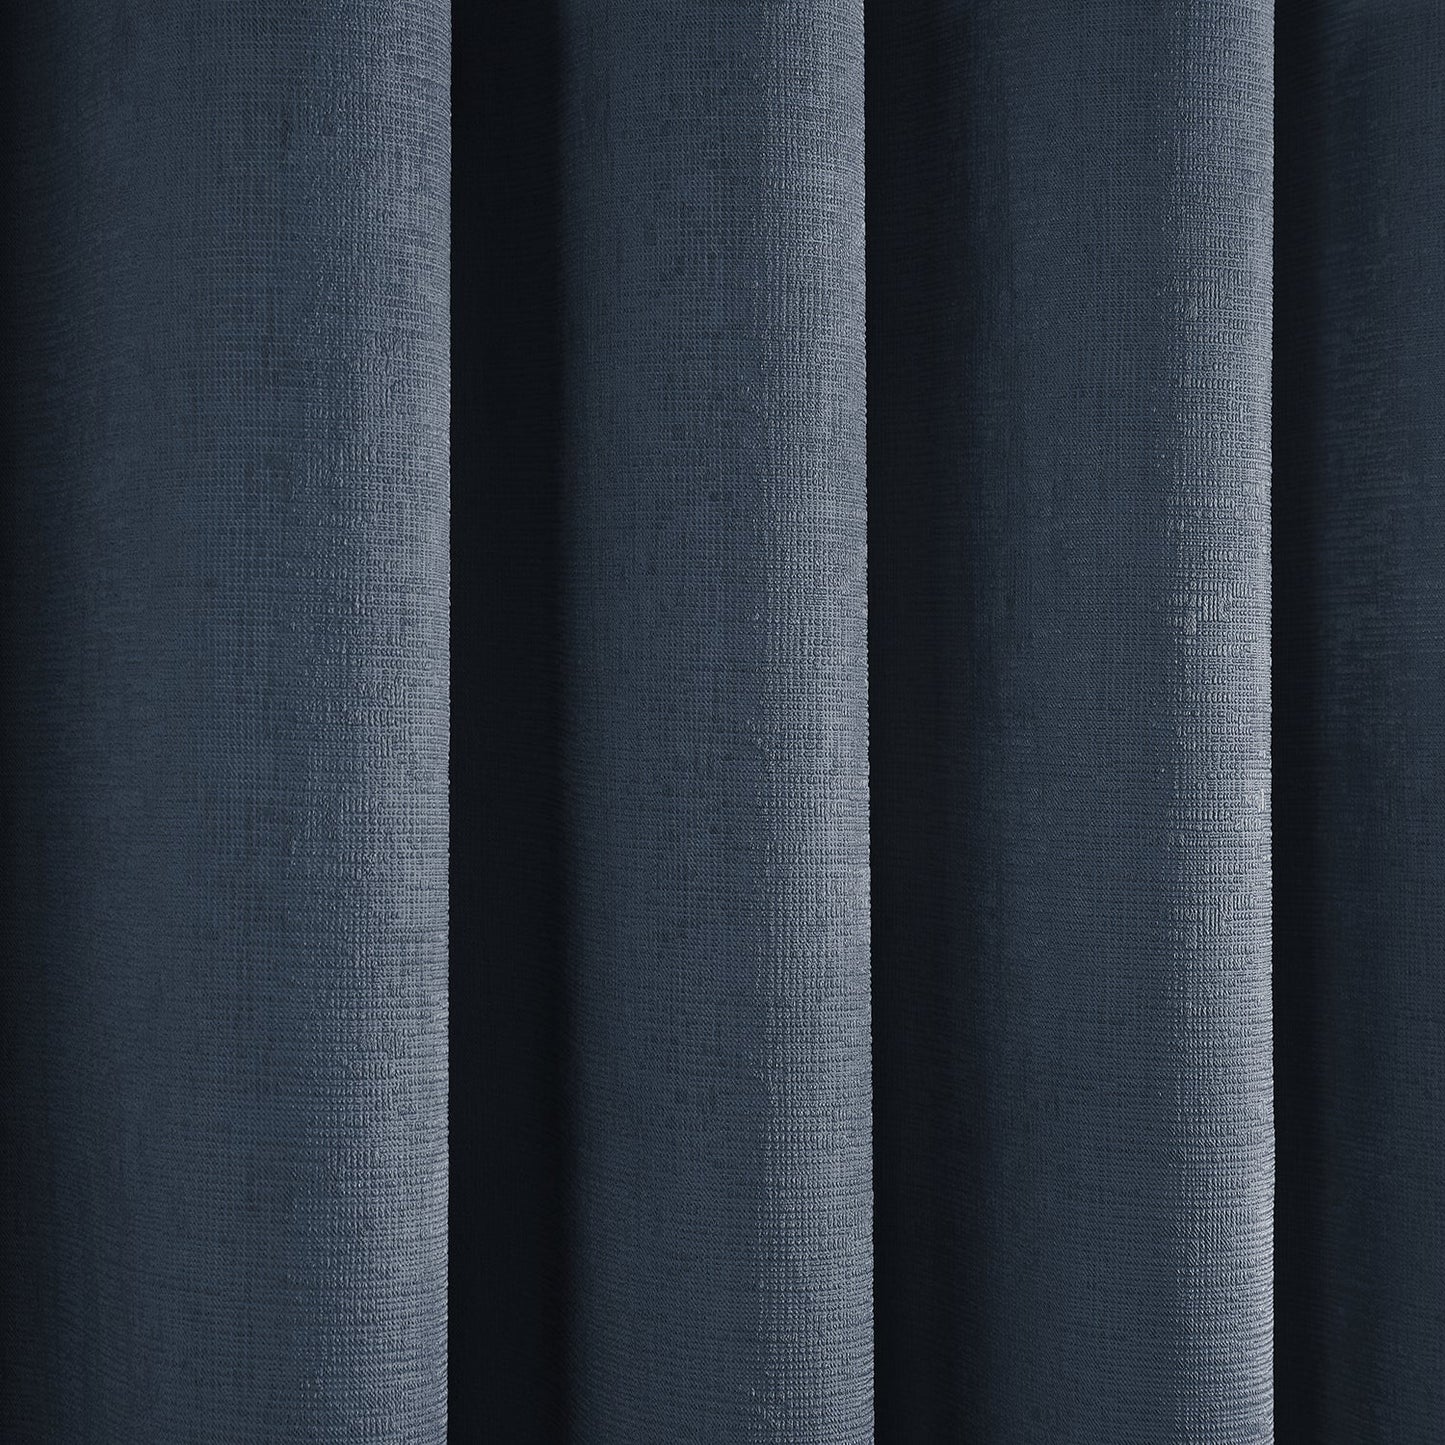 Strata Navy Dim Out Eyelet Curtains